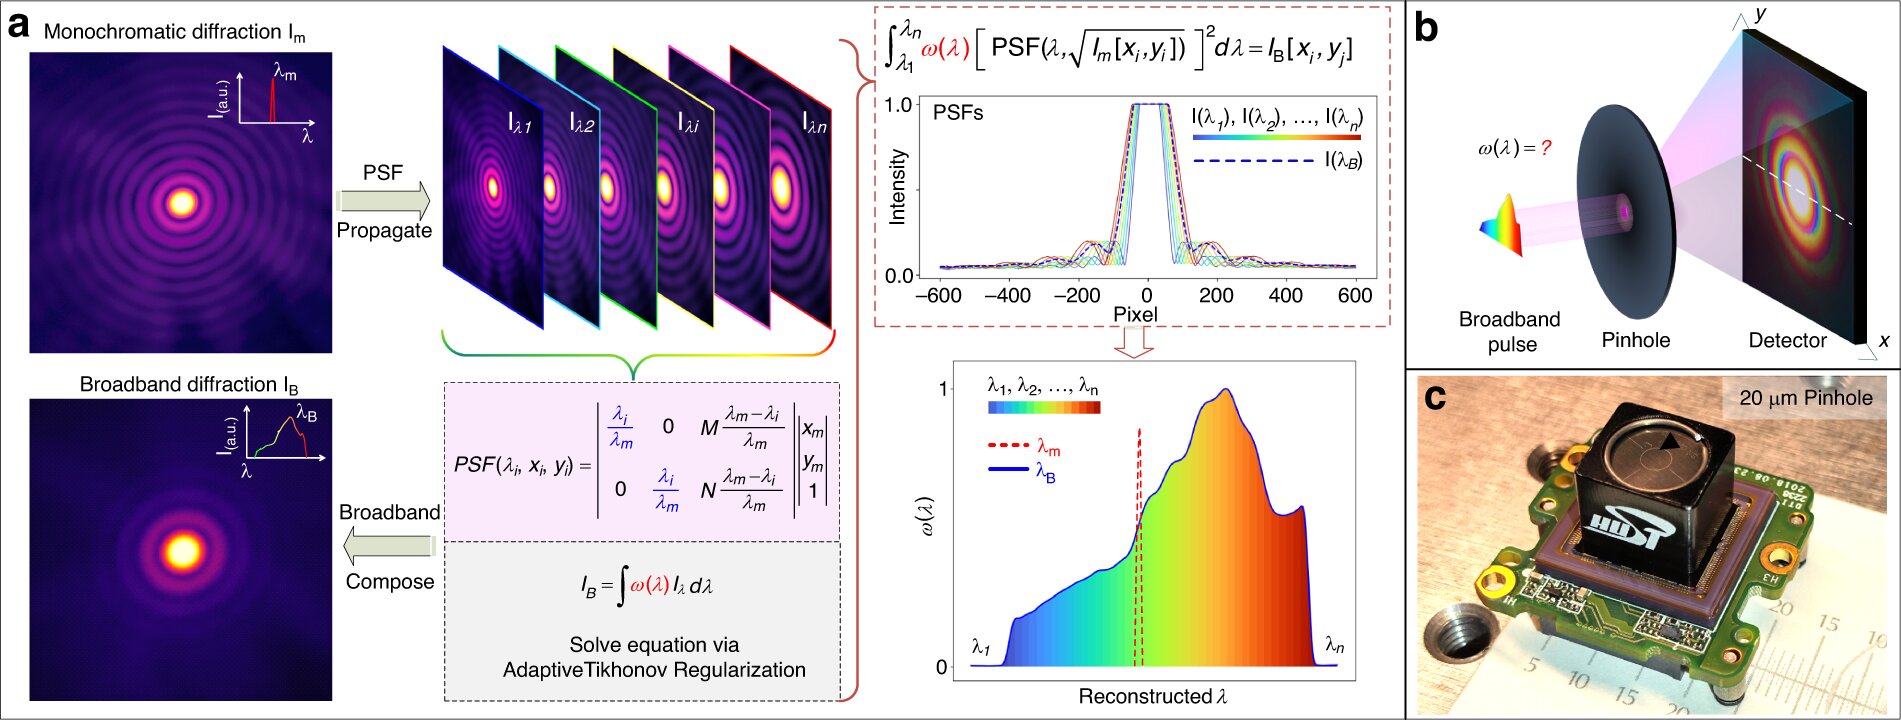 Disrupting conventional designs through novel diffraction computing